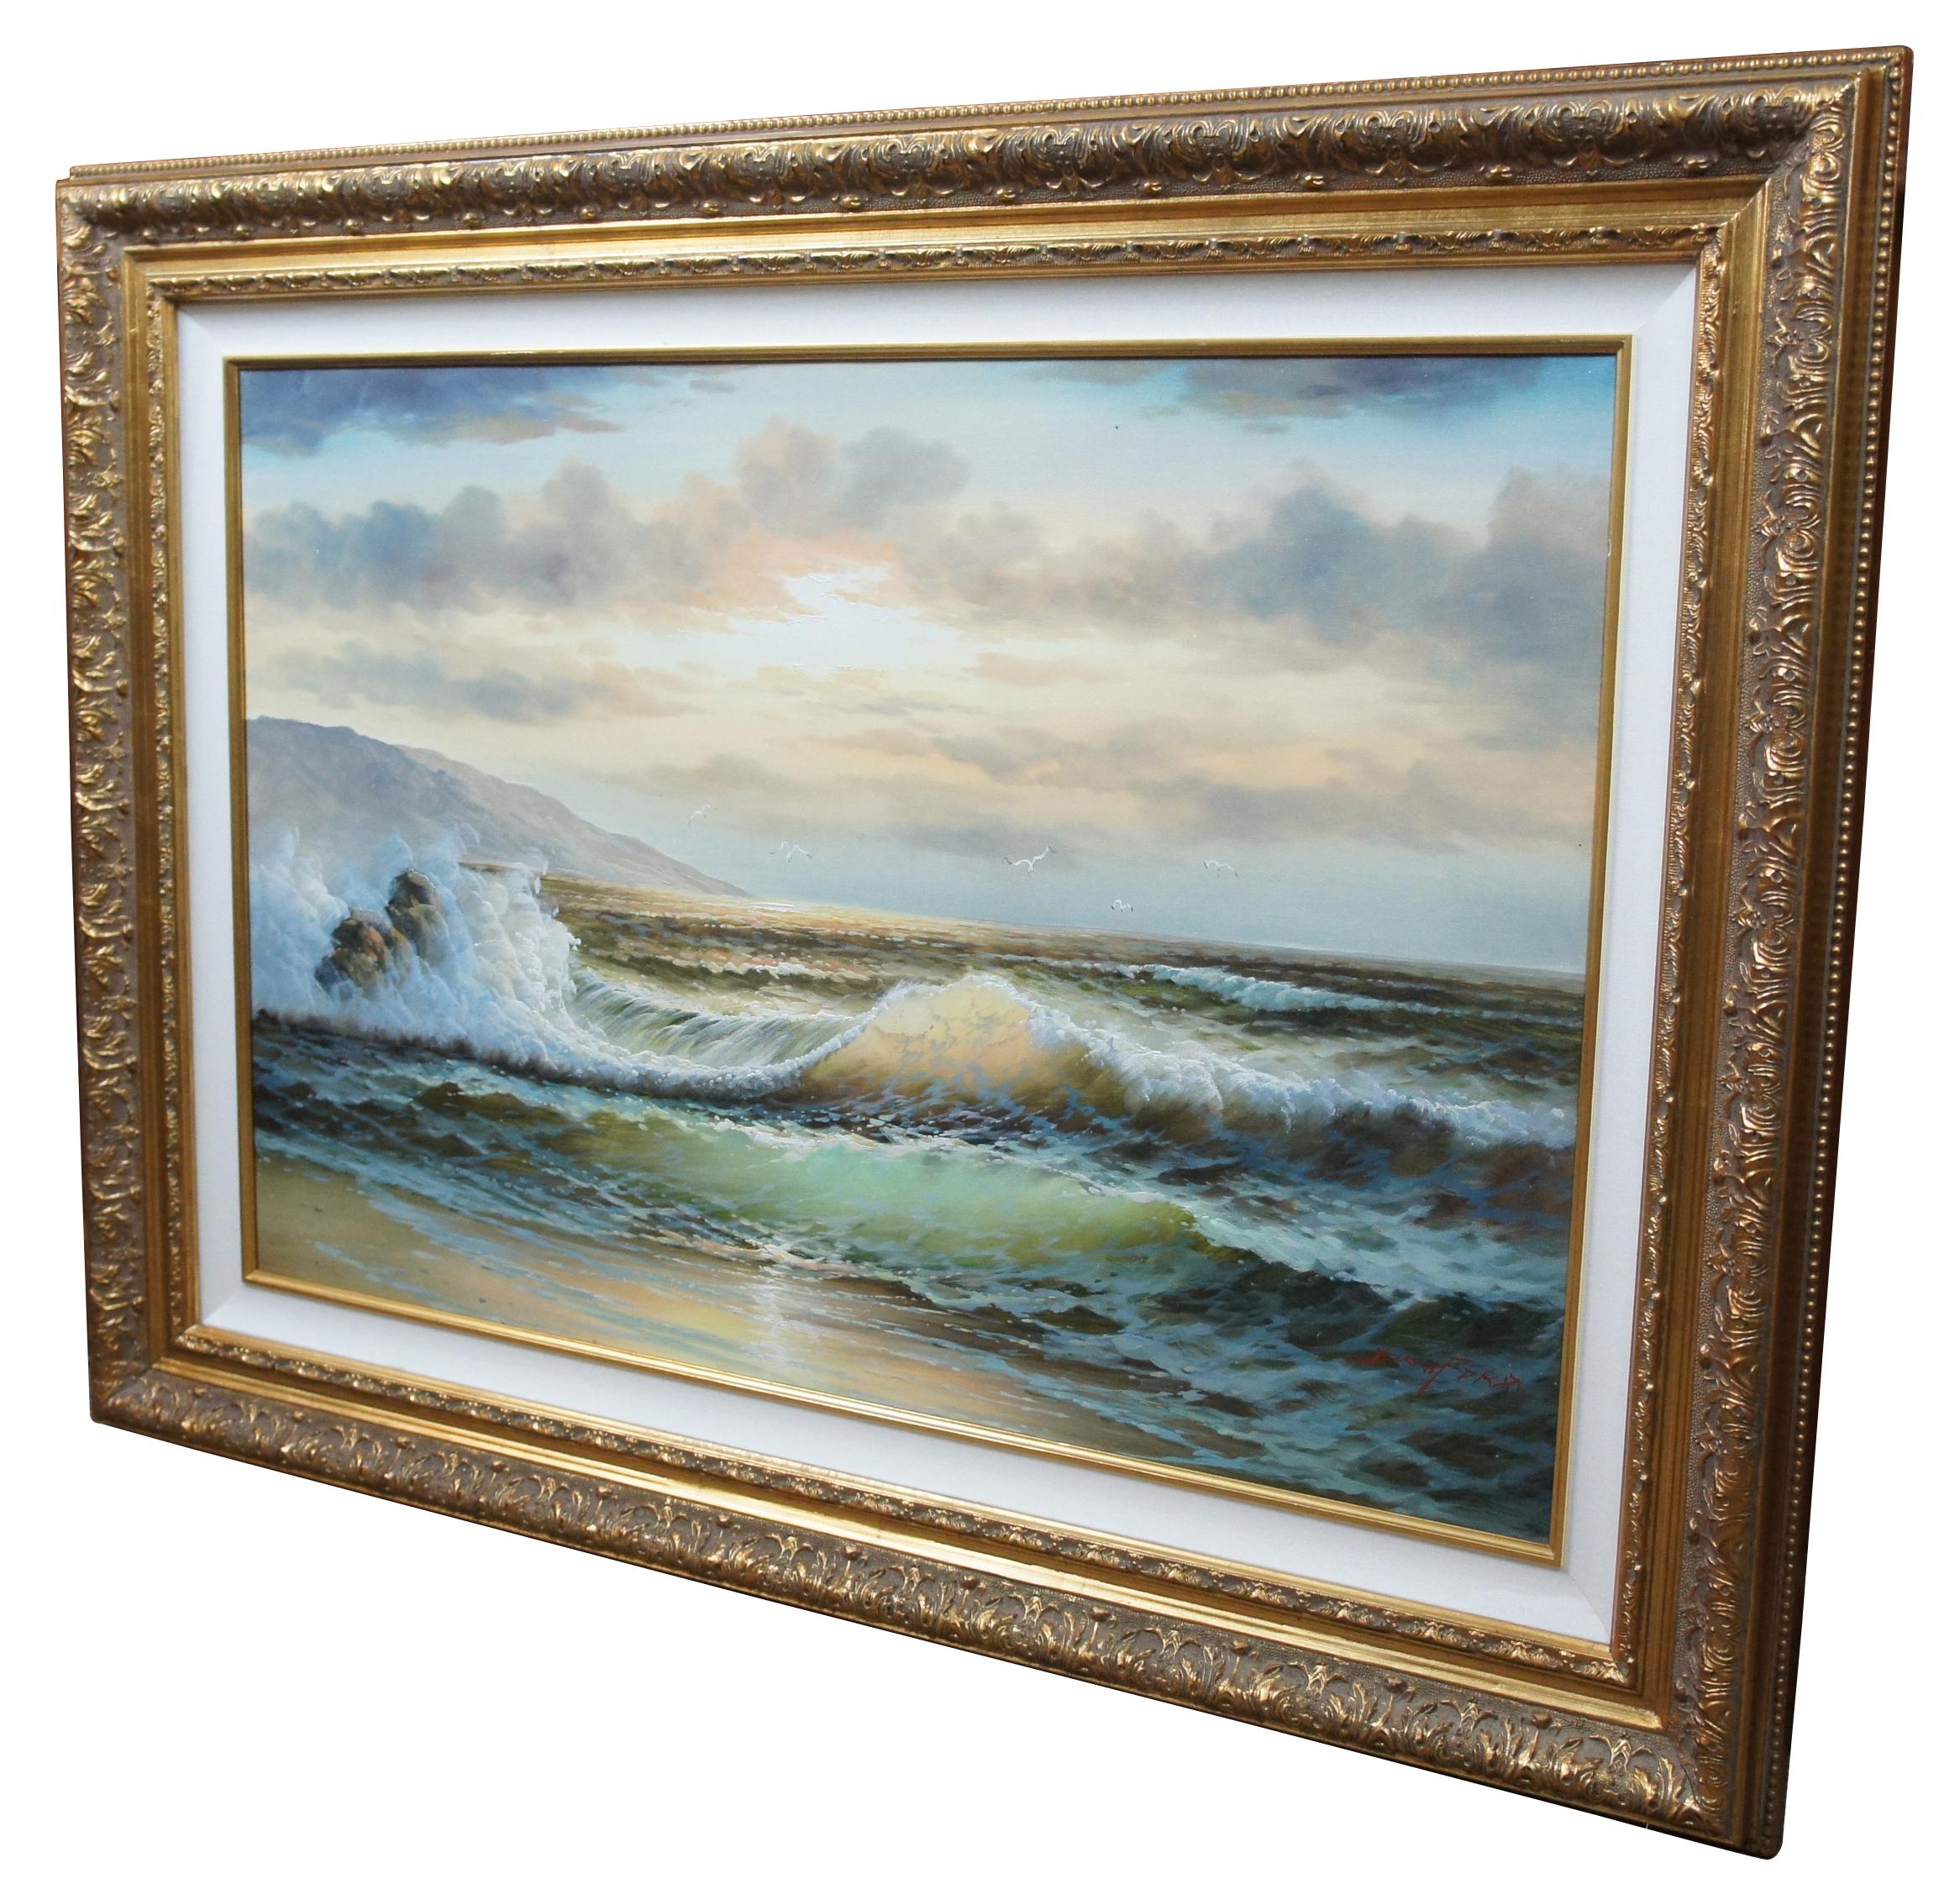 Dan Ford (20th Century) ocean seascape painting.  Featues waves crashing near rocks in the foreground.  Seagulls and land can be seen in the distance.  Dan Ford  graduated from Nanjing University and specialized in Landscapes.  
